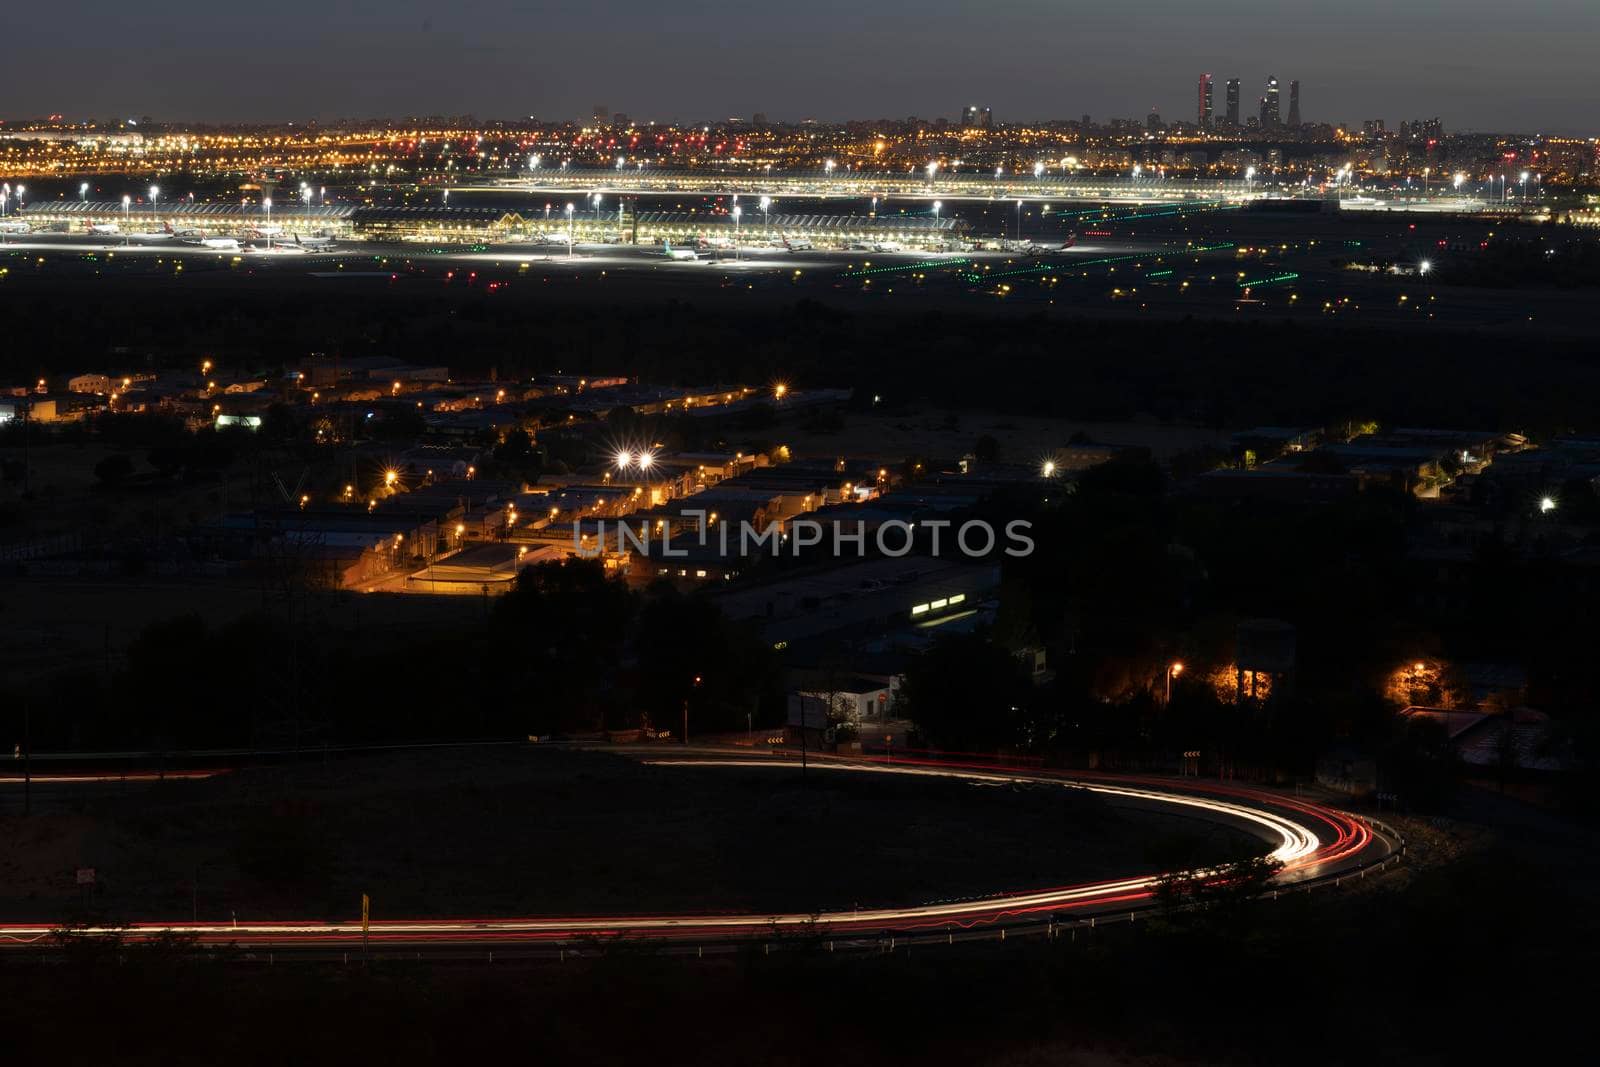 Madrid skyline at night. Barajas airport and 4 towers in the background. Slow shutter of traffic. by papatonic